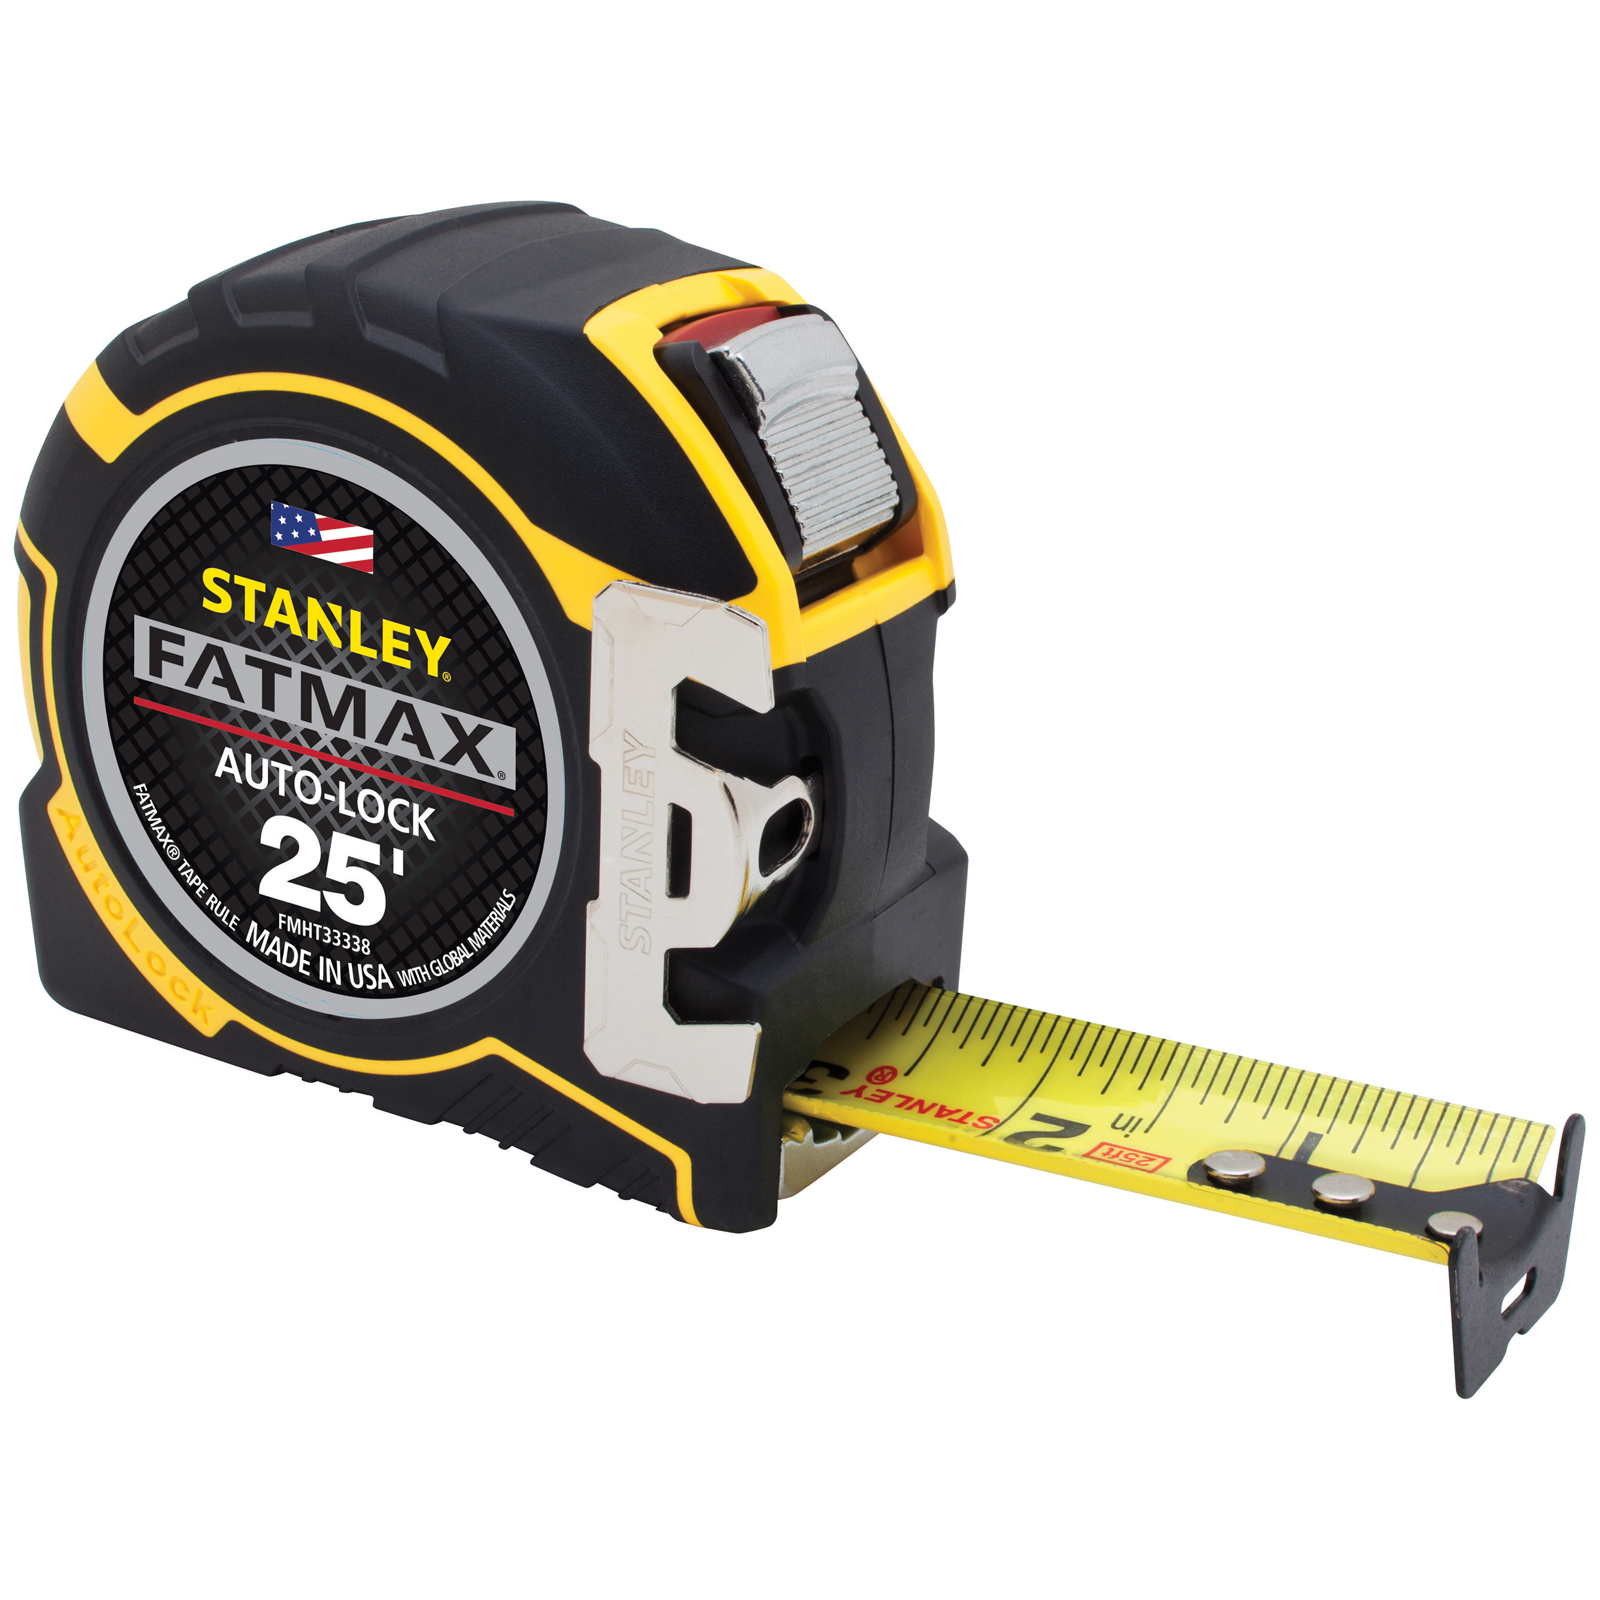 STANLEY FMHT33338 11/4Inch Auto Lock Tape Measure Shop Your Way Online Shopping & Earn